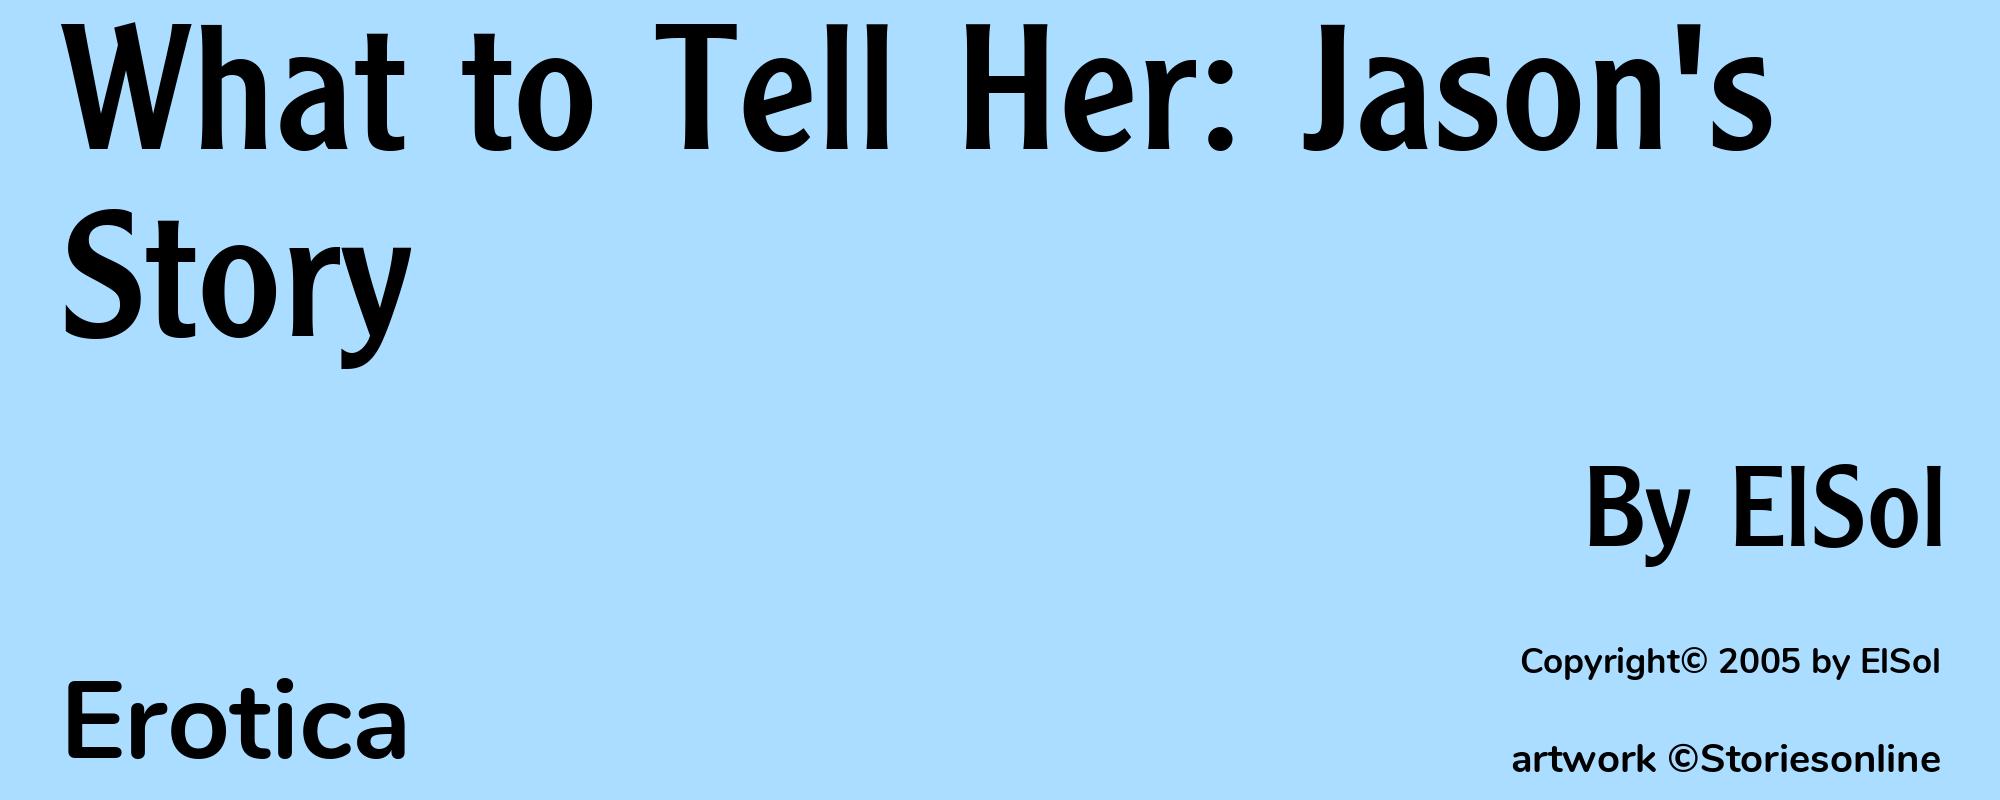 What to Tell Her: Jason's Story - Cover